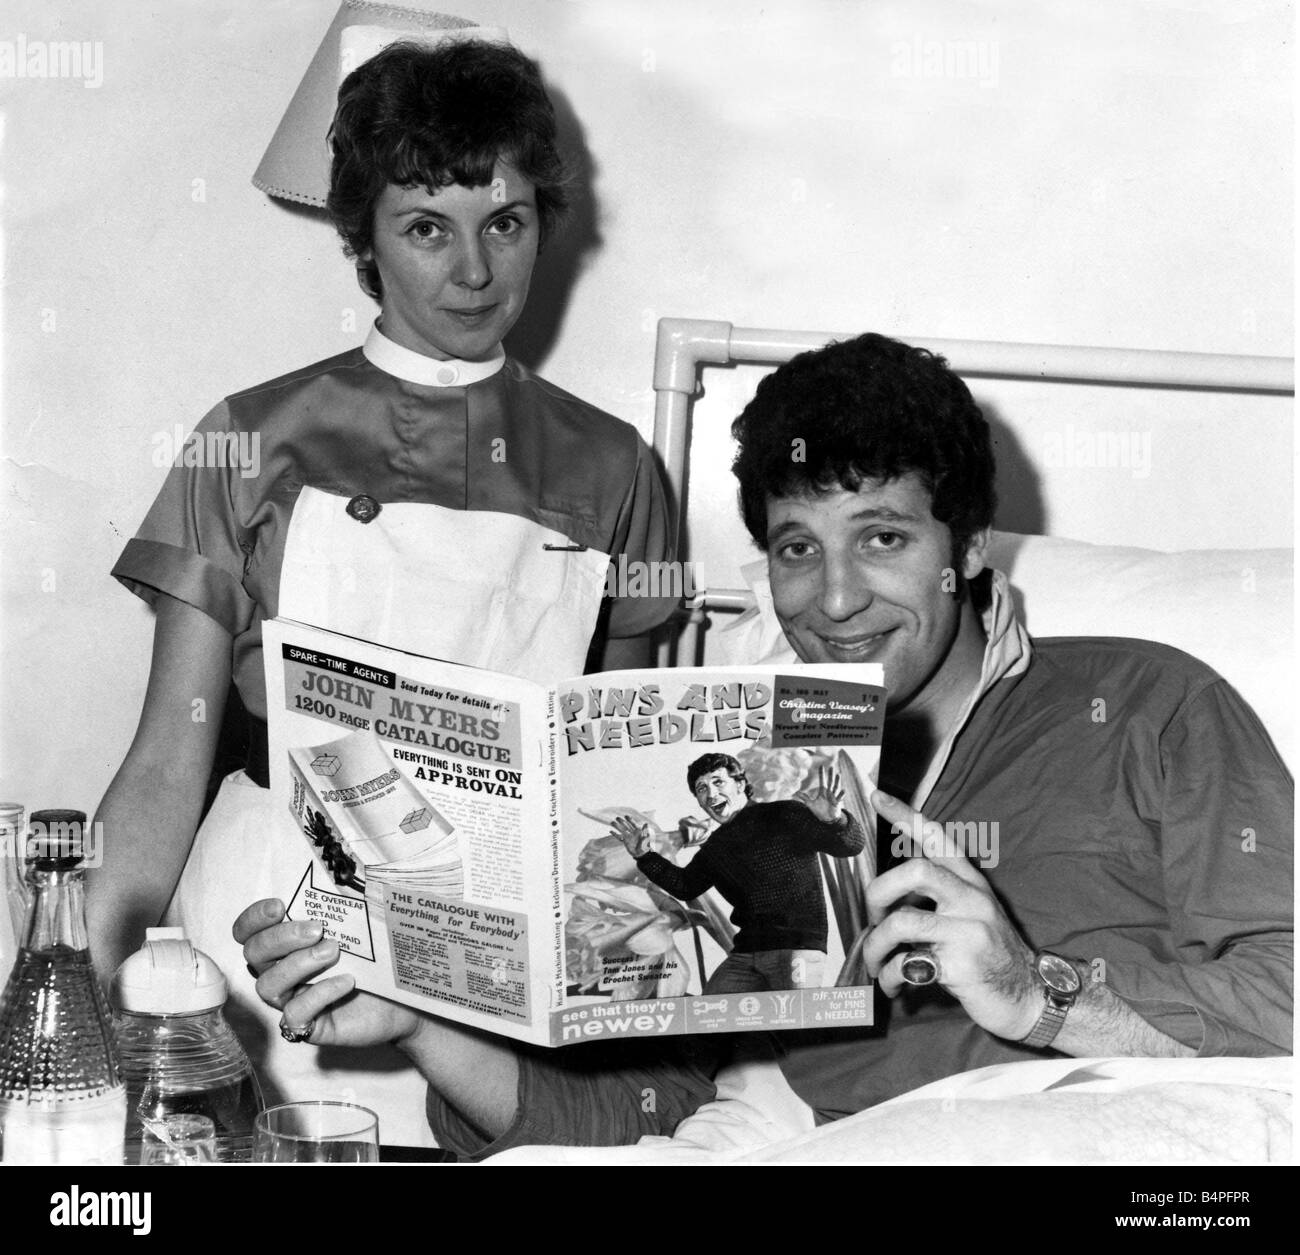 Tom Jones has his tonsils out The 25 year old singer had the operation Wednesday at the London Clinic and expects to be out of action for the next three weeks The Singer is photographed in the clinic after his operation looking at a woman s magazine Pins and Needles with a picture of himself on the cover Also in the picture is Sister Margaret Wilkinson of Barmouth North Wales May 1965 Stock Photo